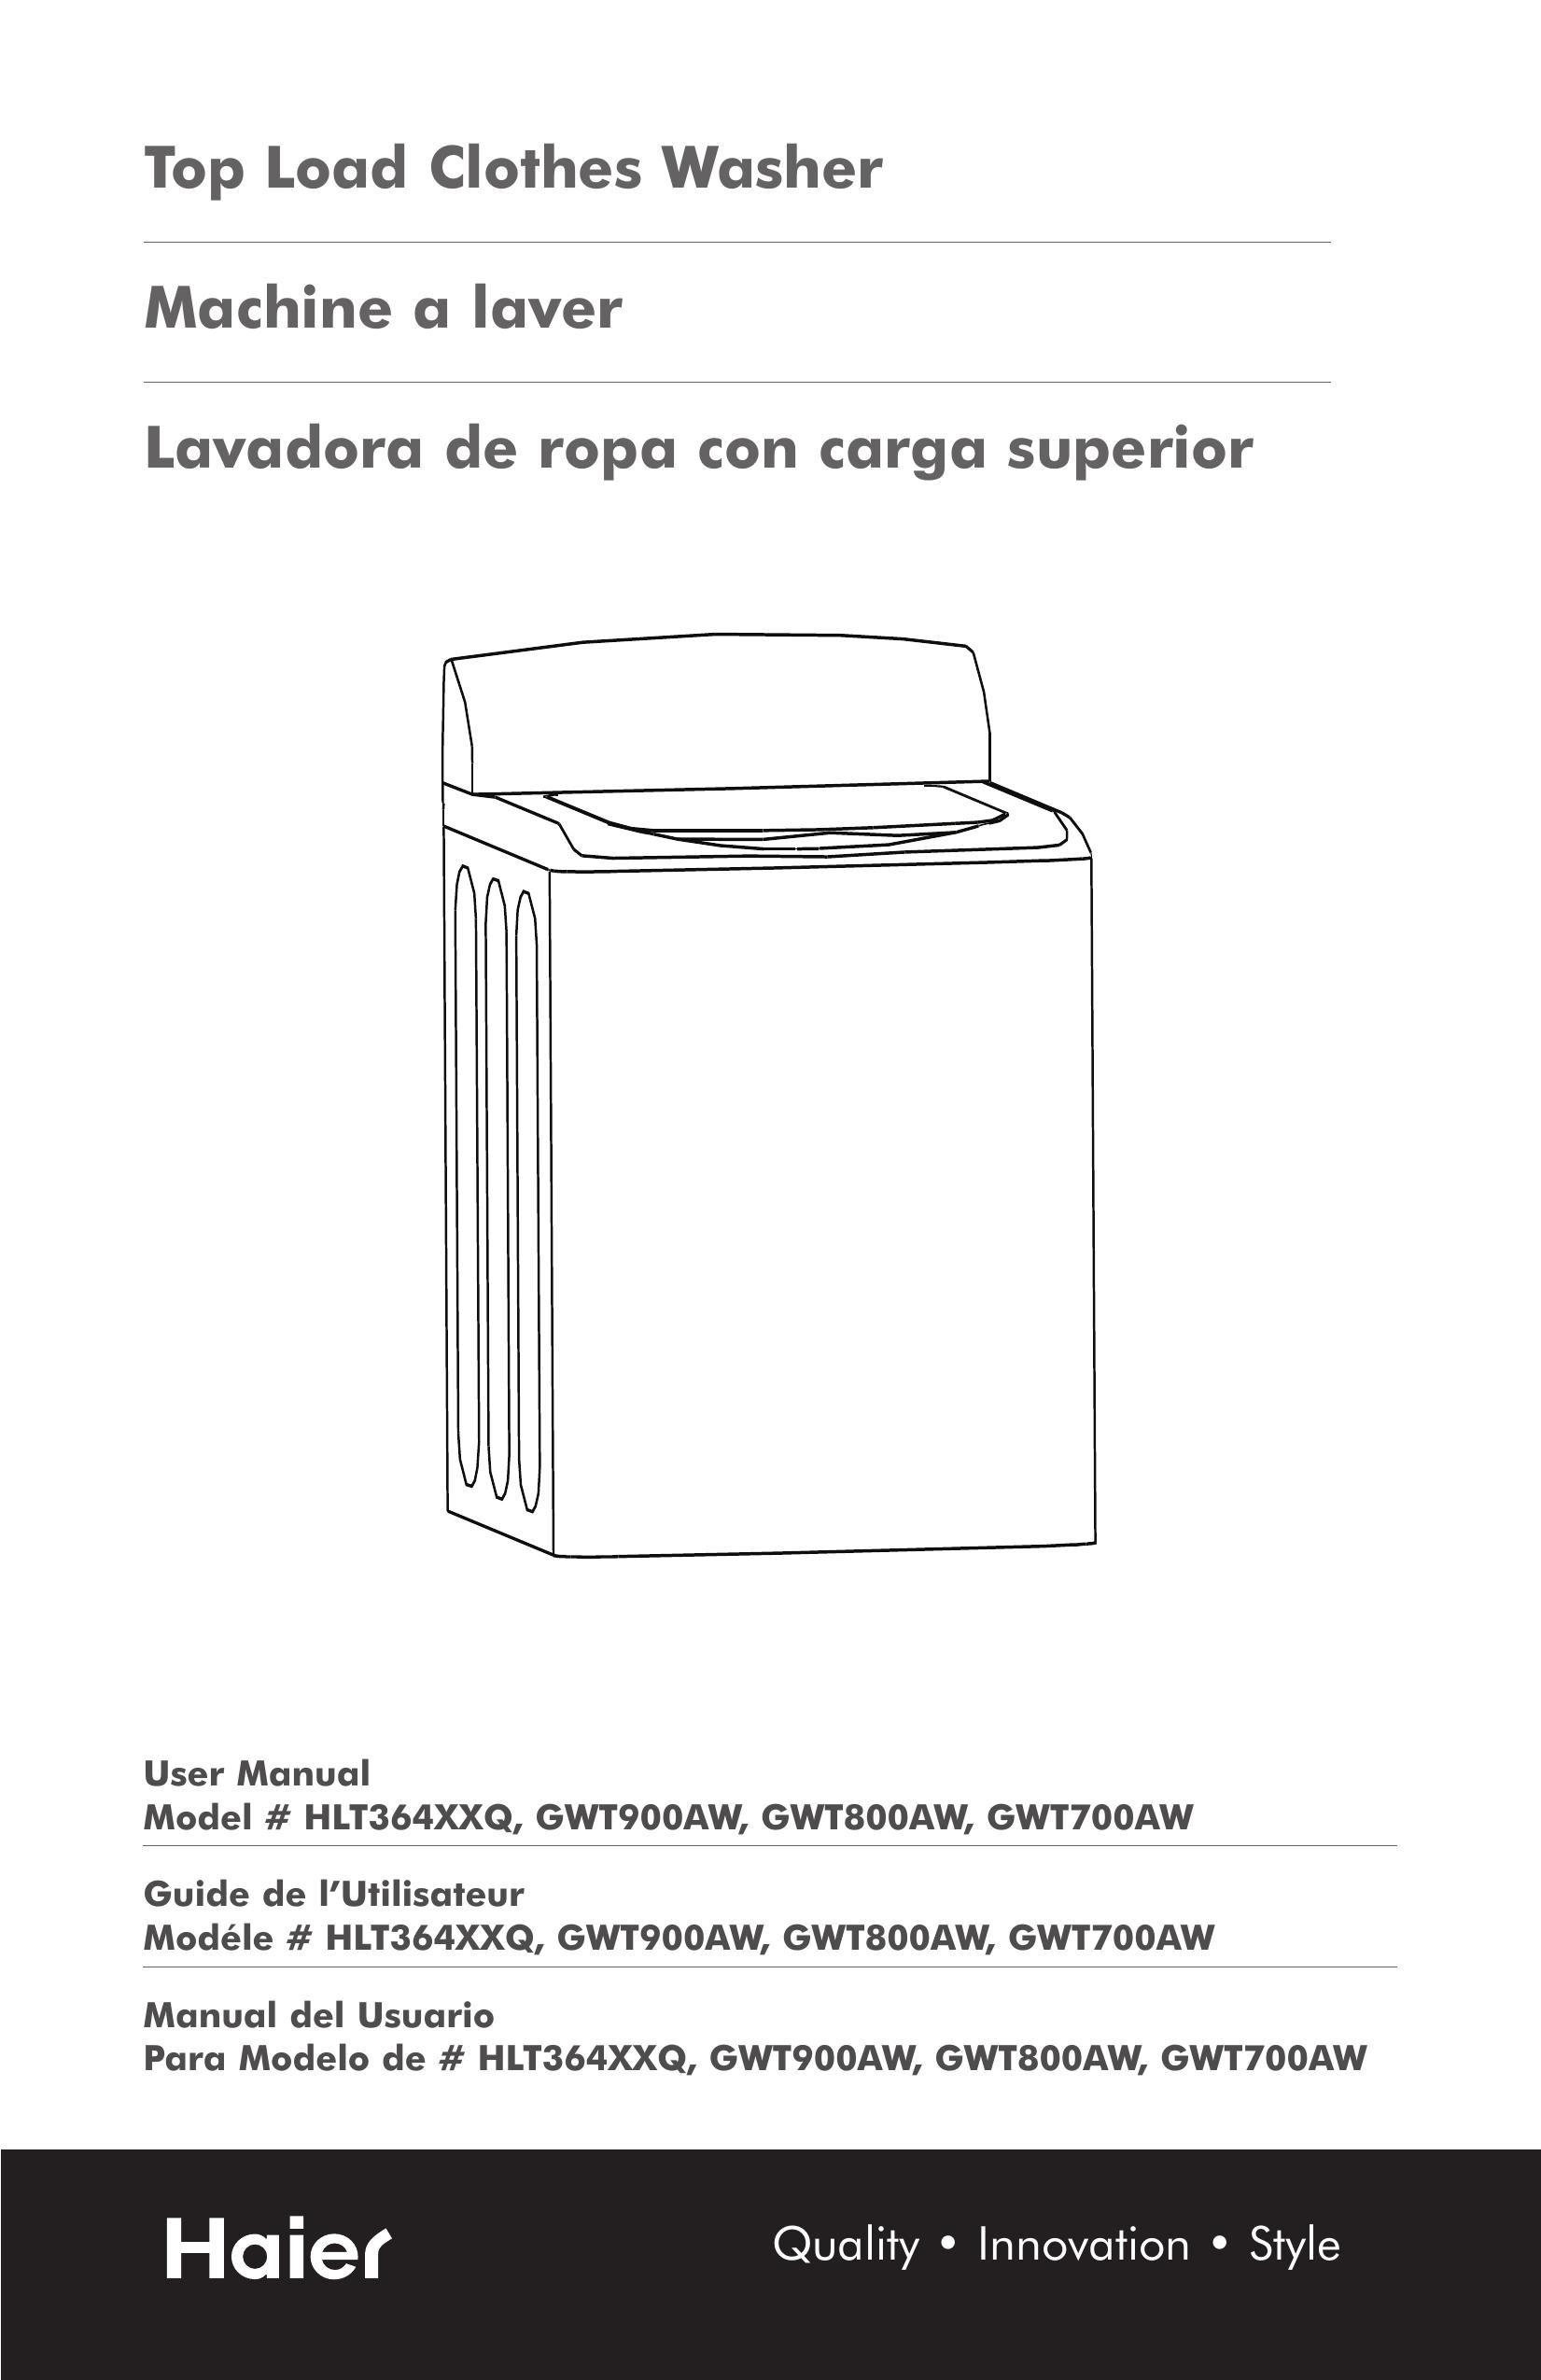 Haier GWT700AW Washer User Manual